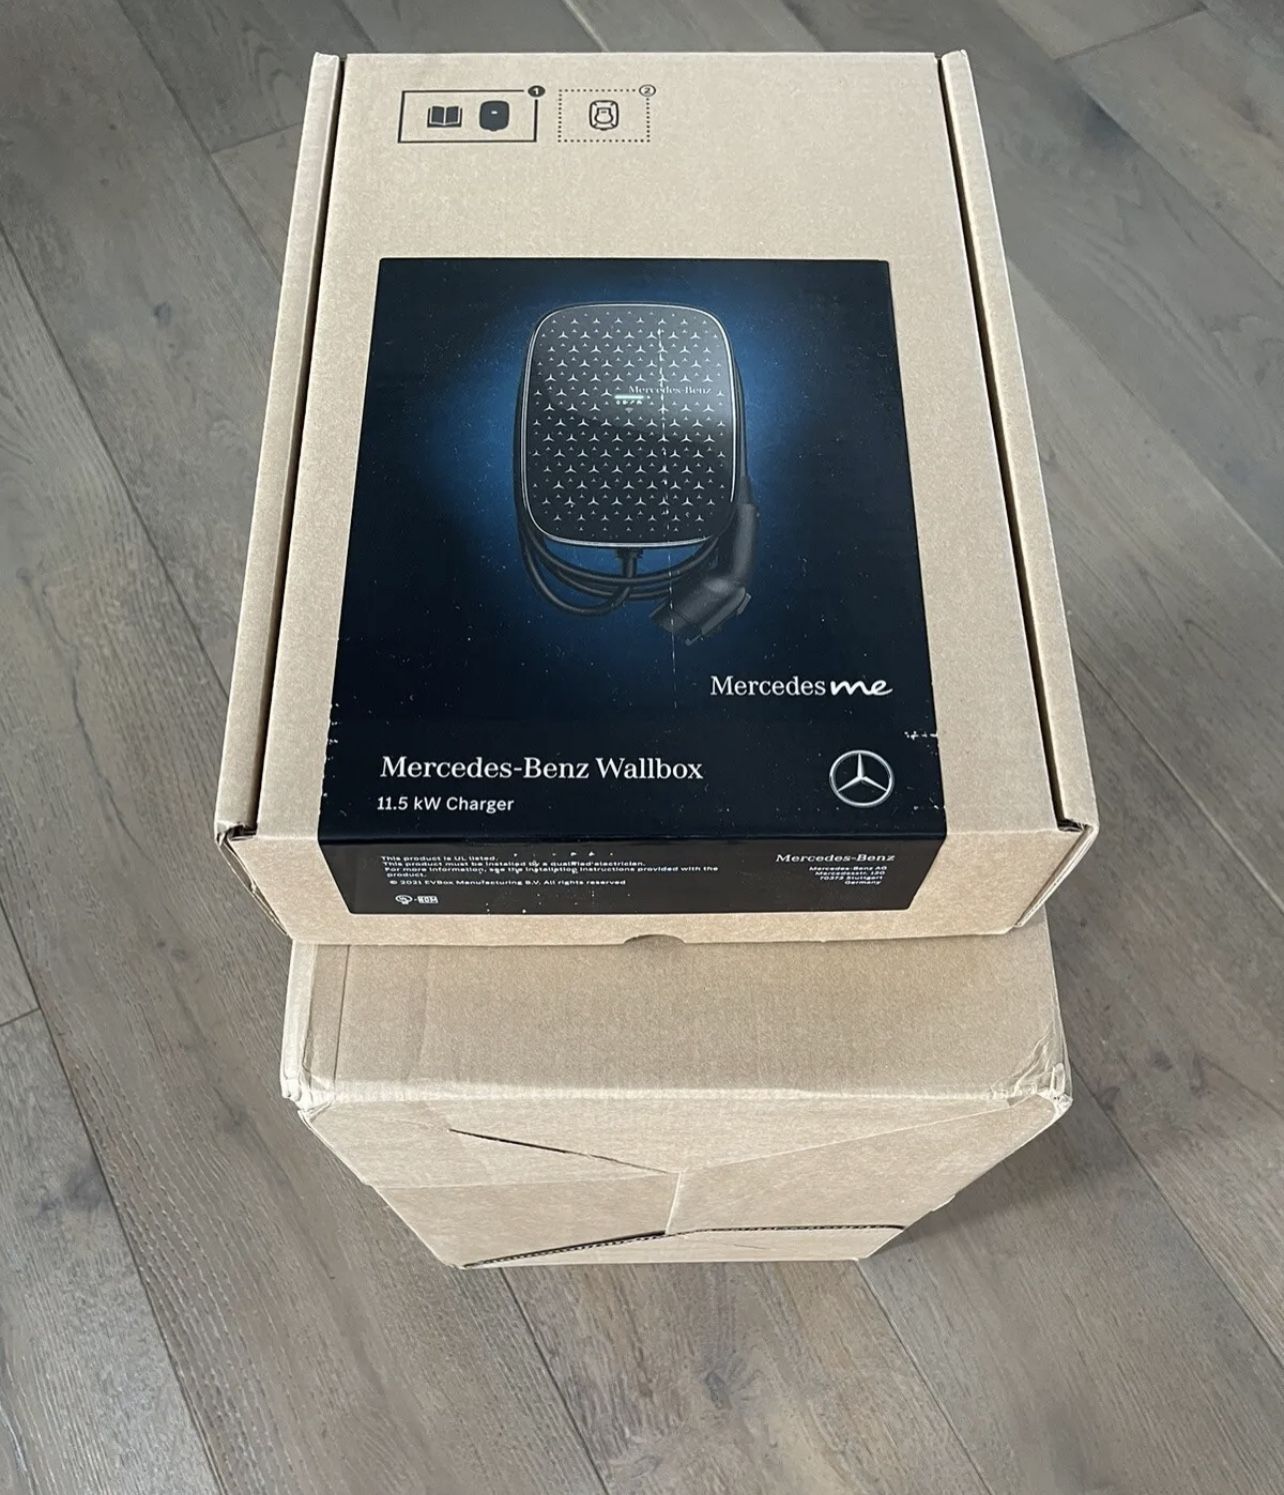 Mercedes-Benz Wallbox EV charger is a Level 2 charging unit 